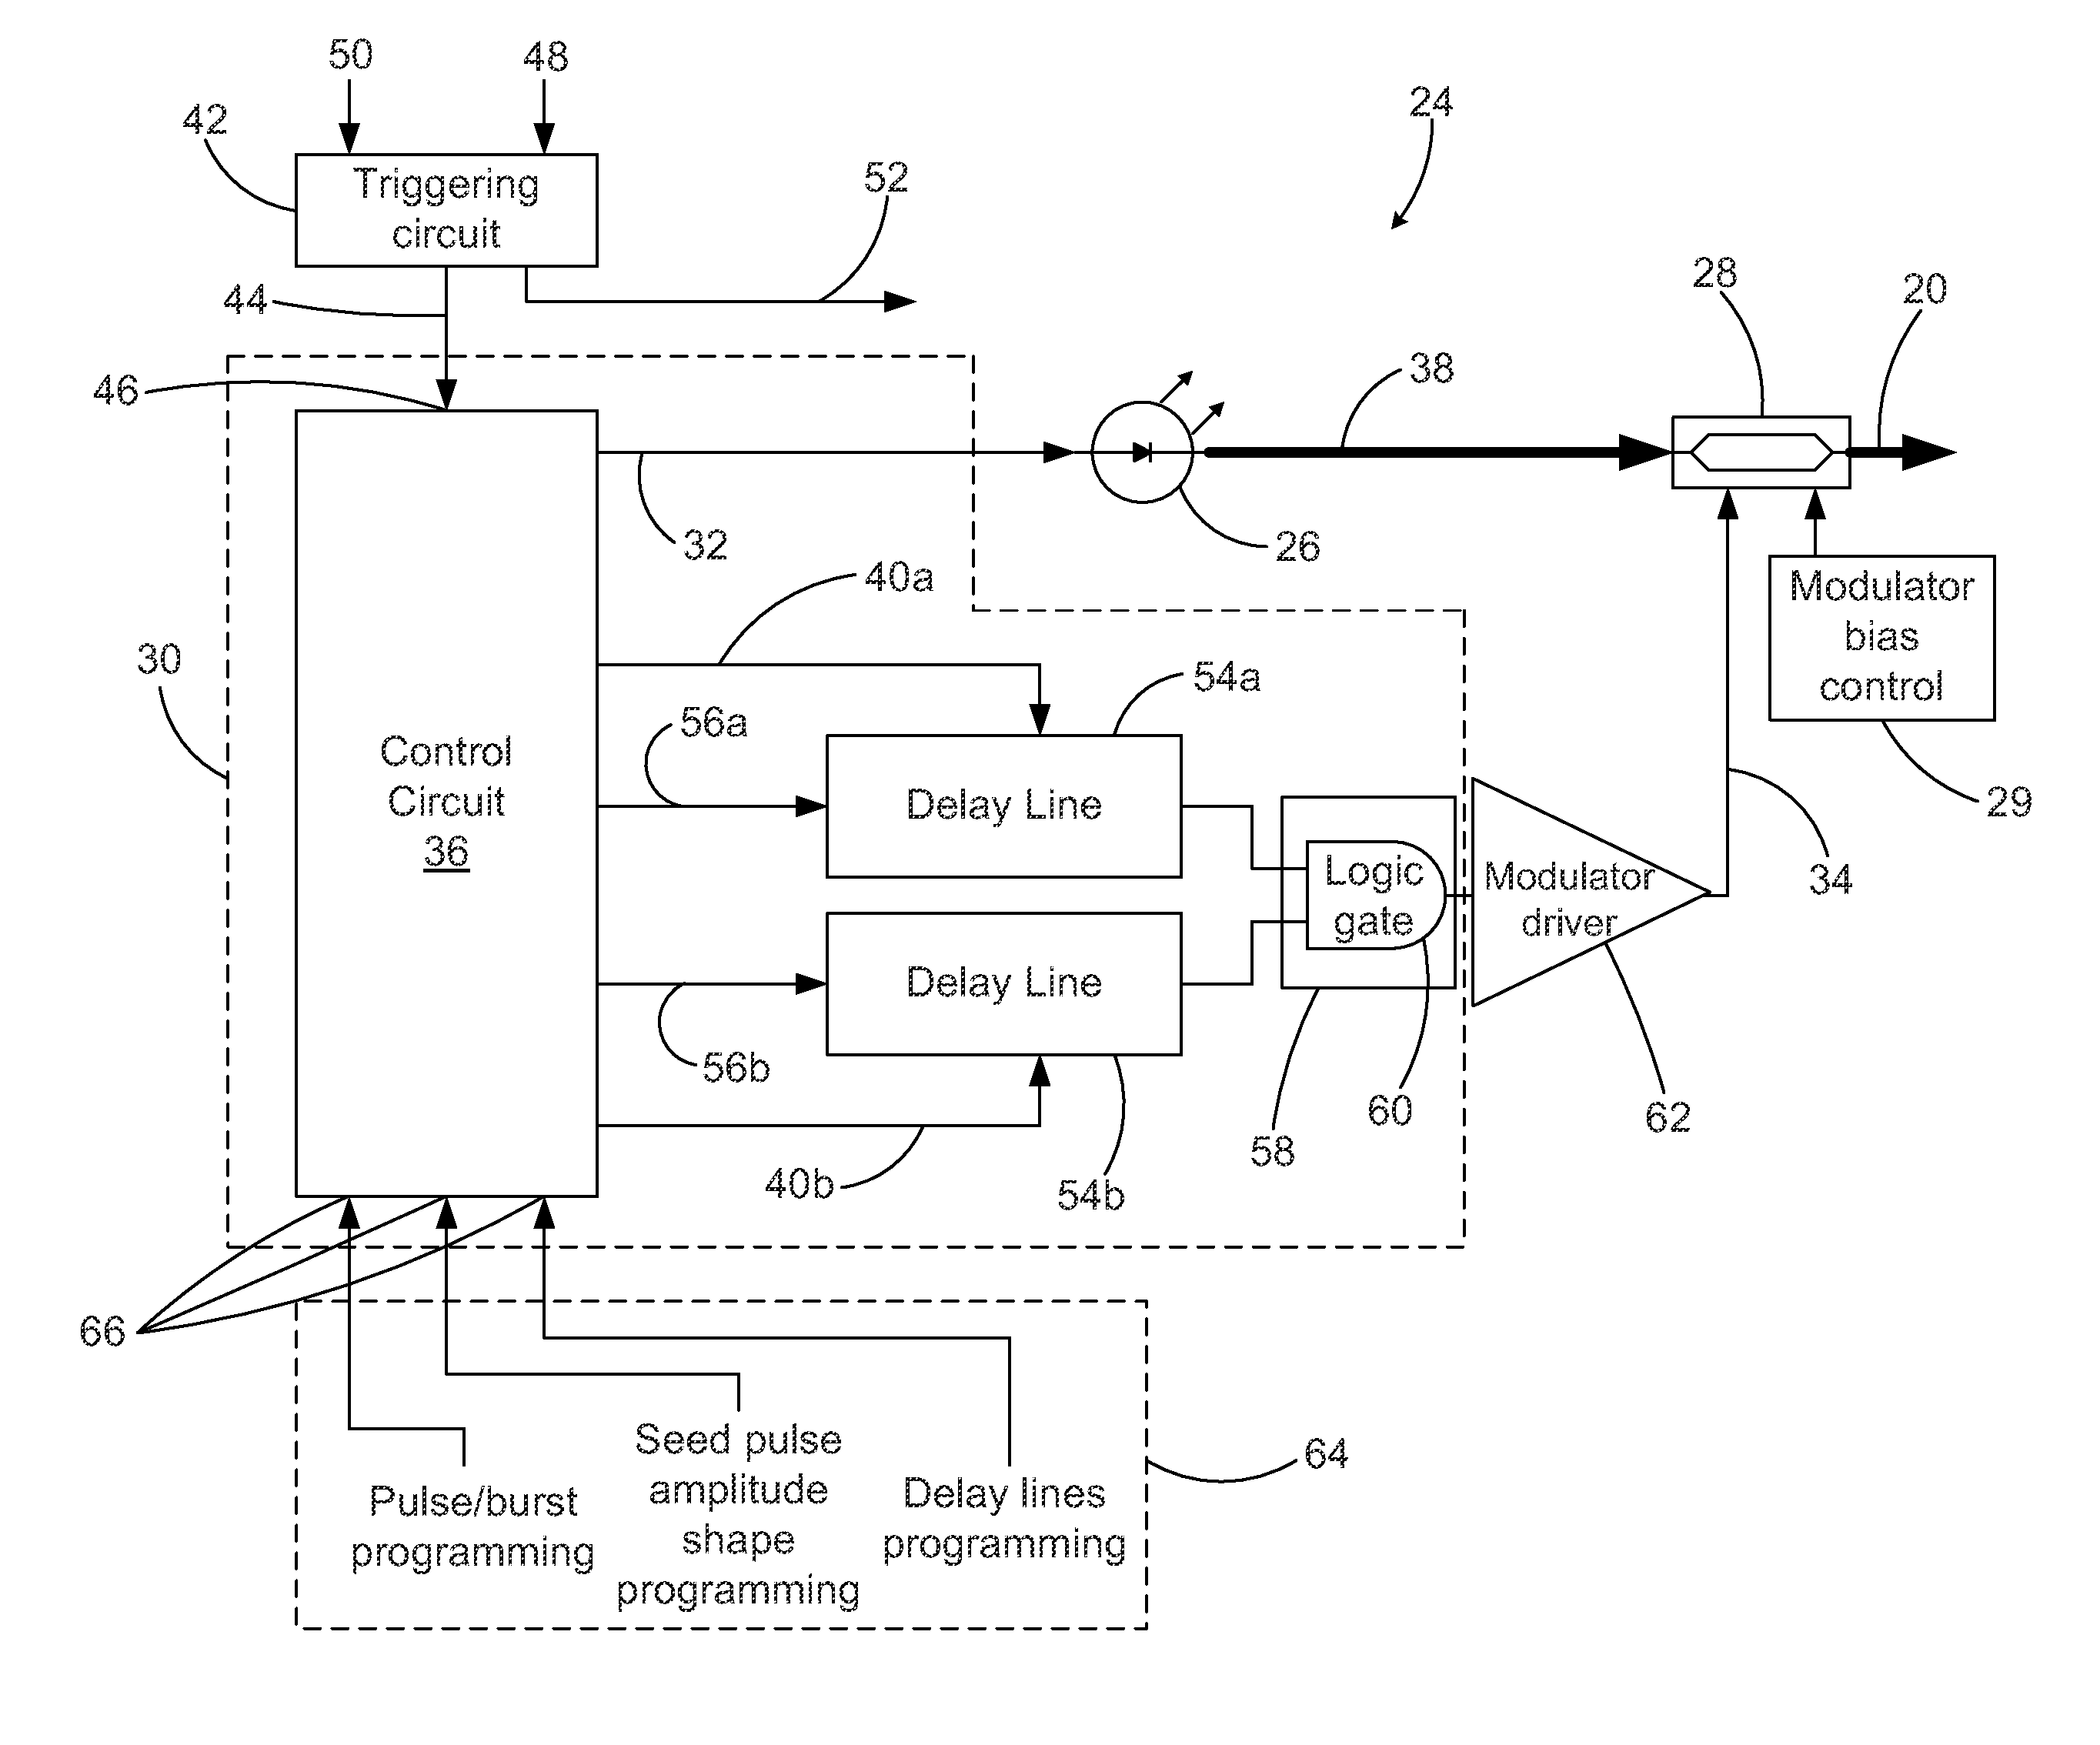 Circuit assembly for controlling an optical system to generate optical pulses and pulse bursts